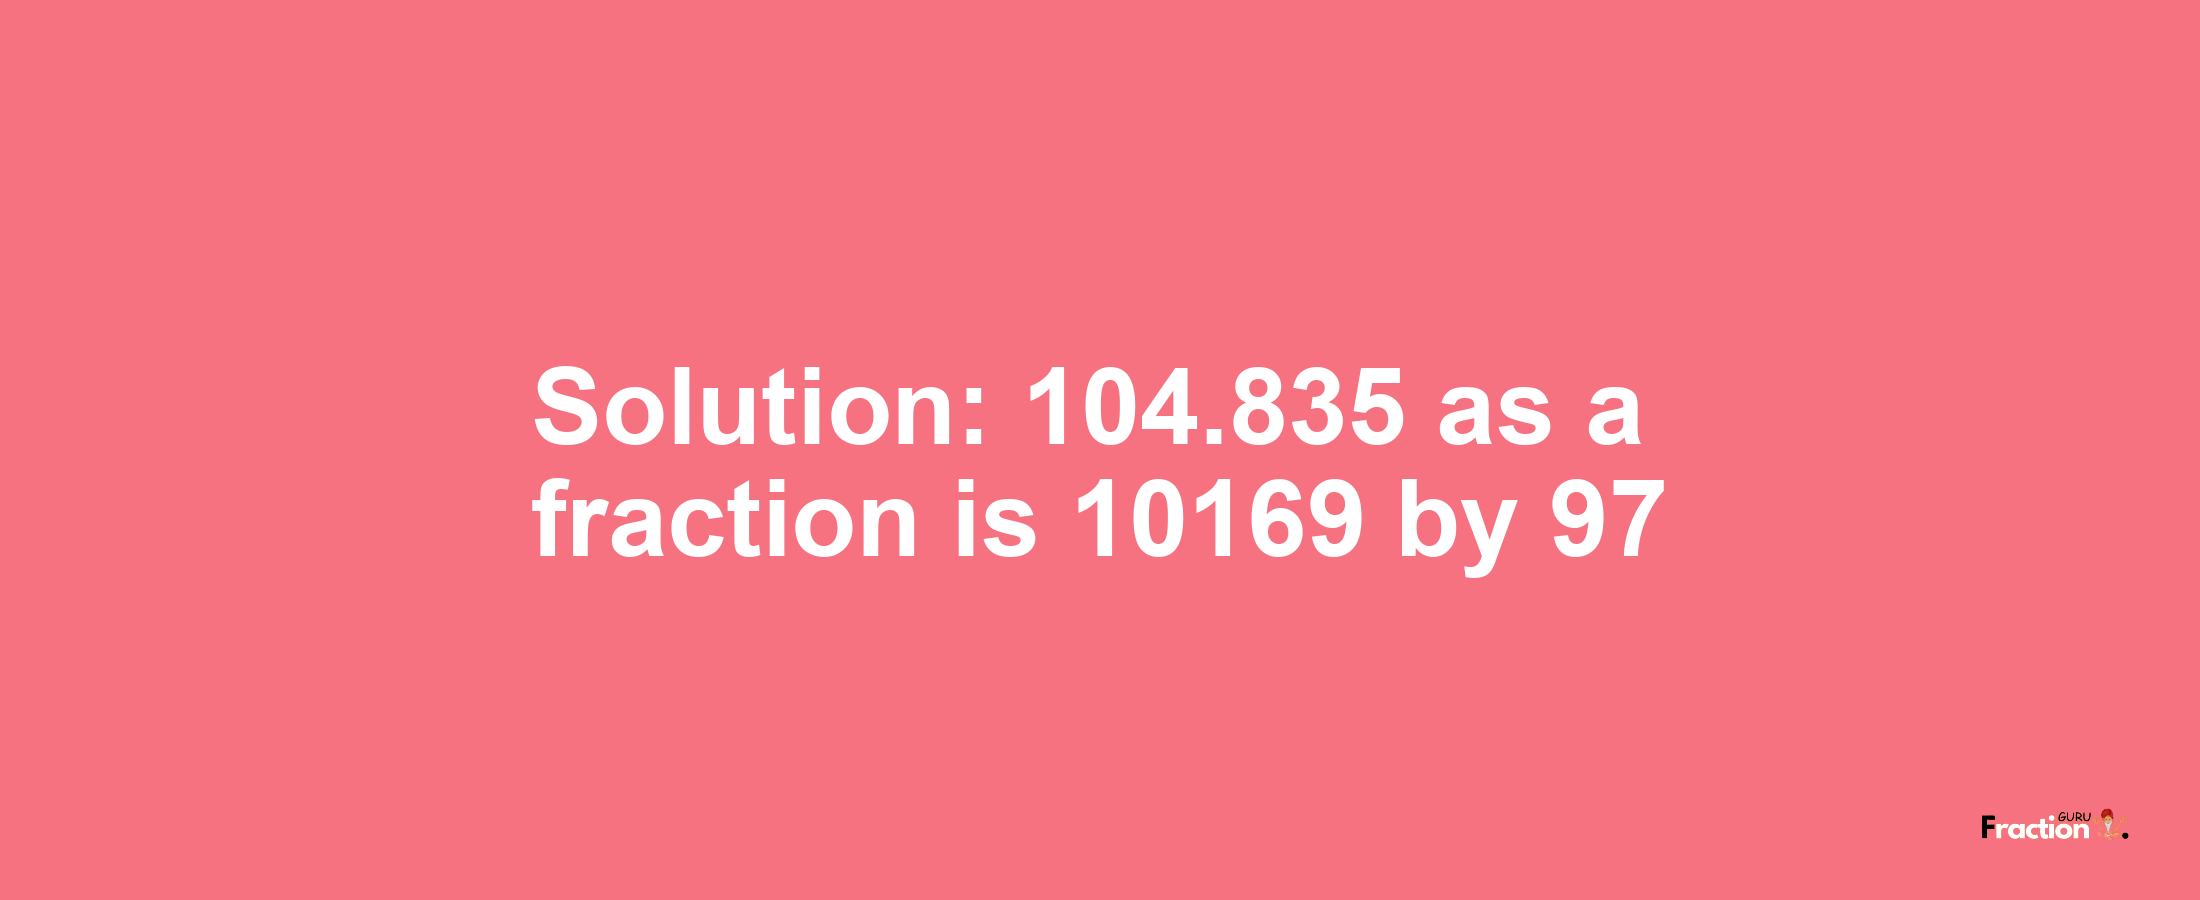 Solution:104.835 as a fraction is 10169/97